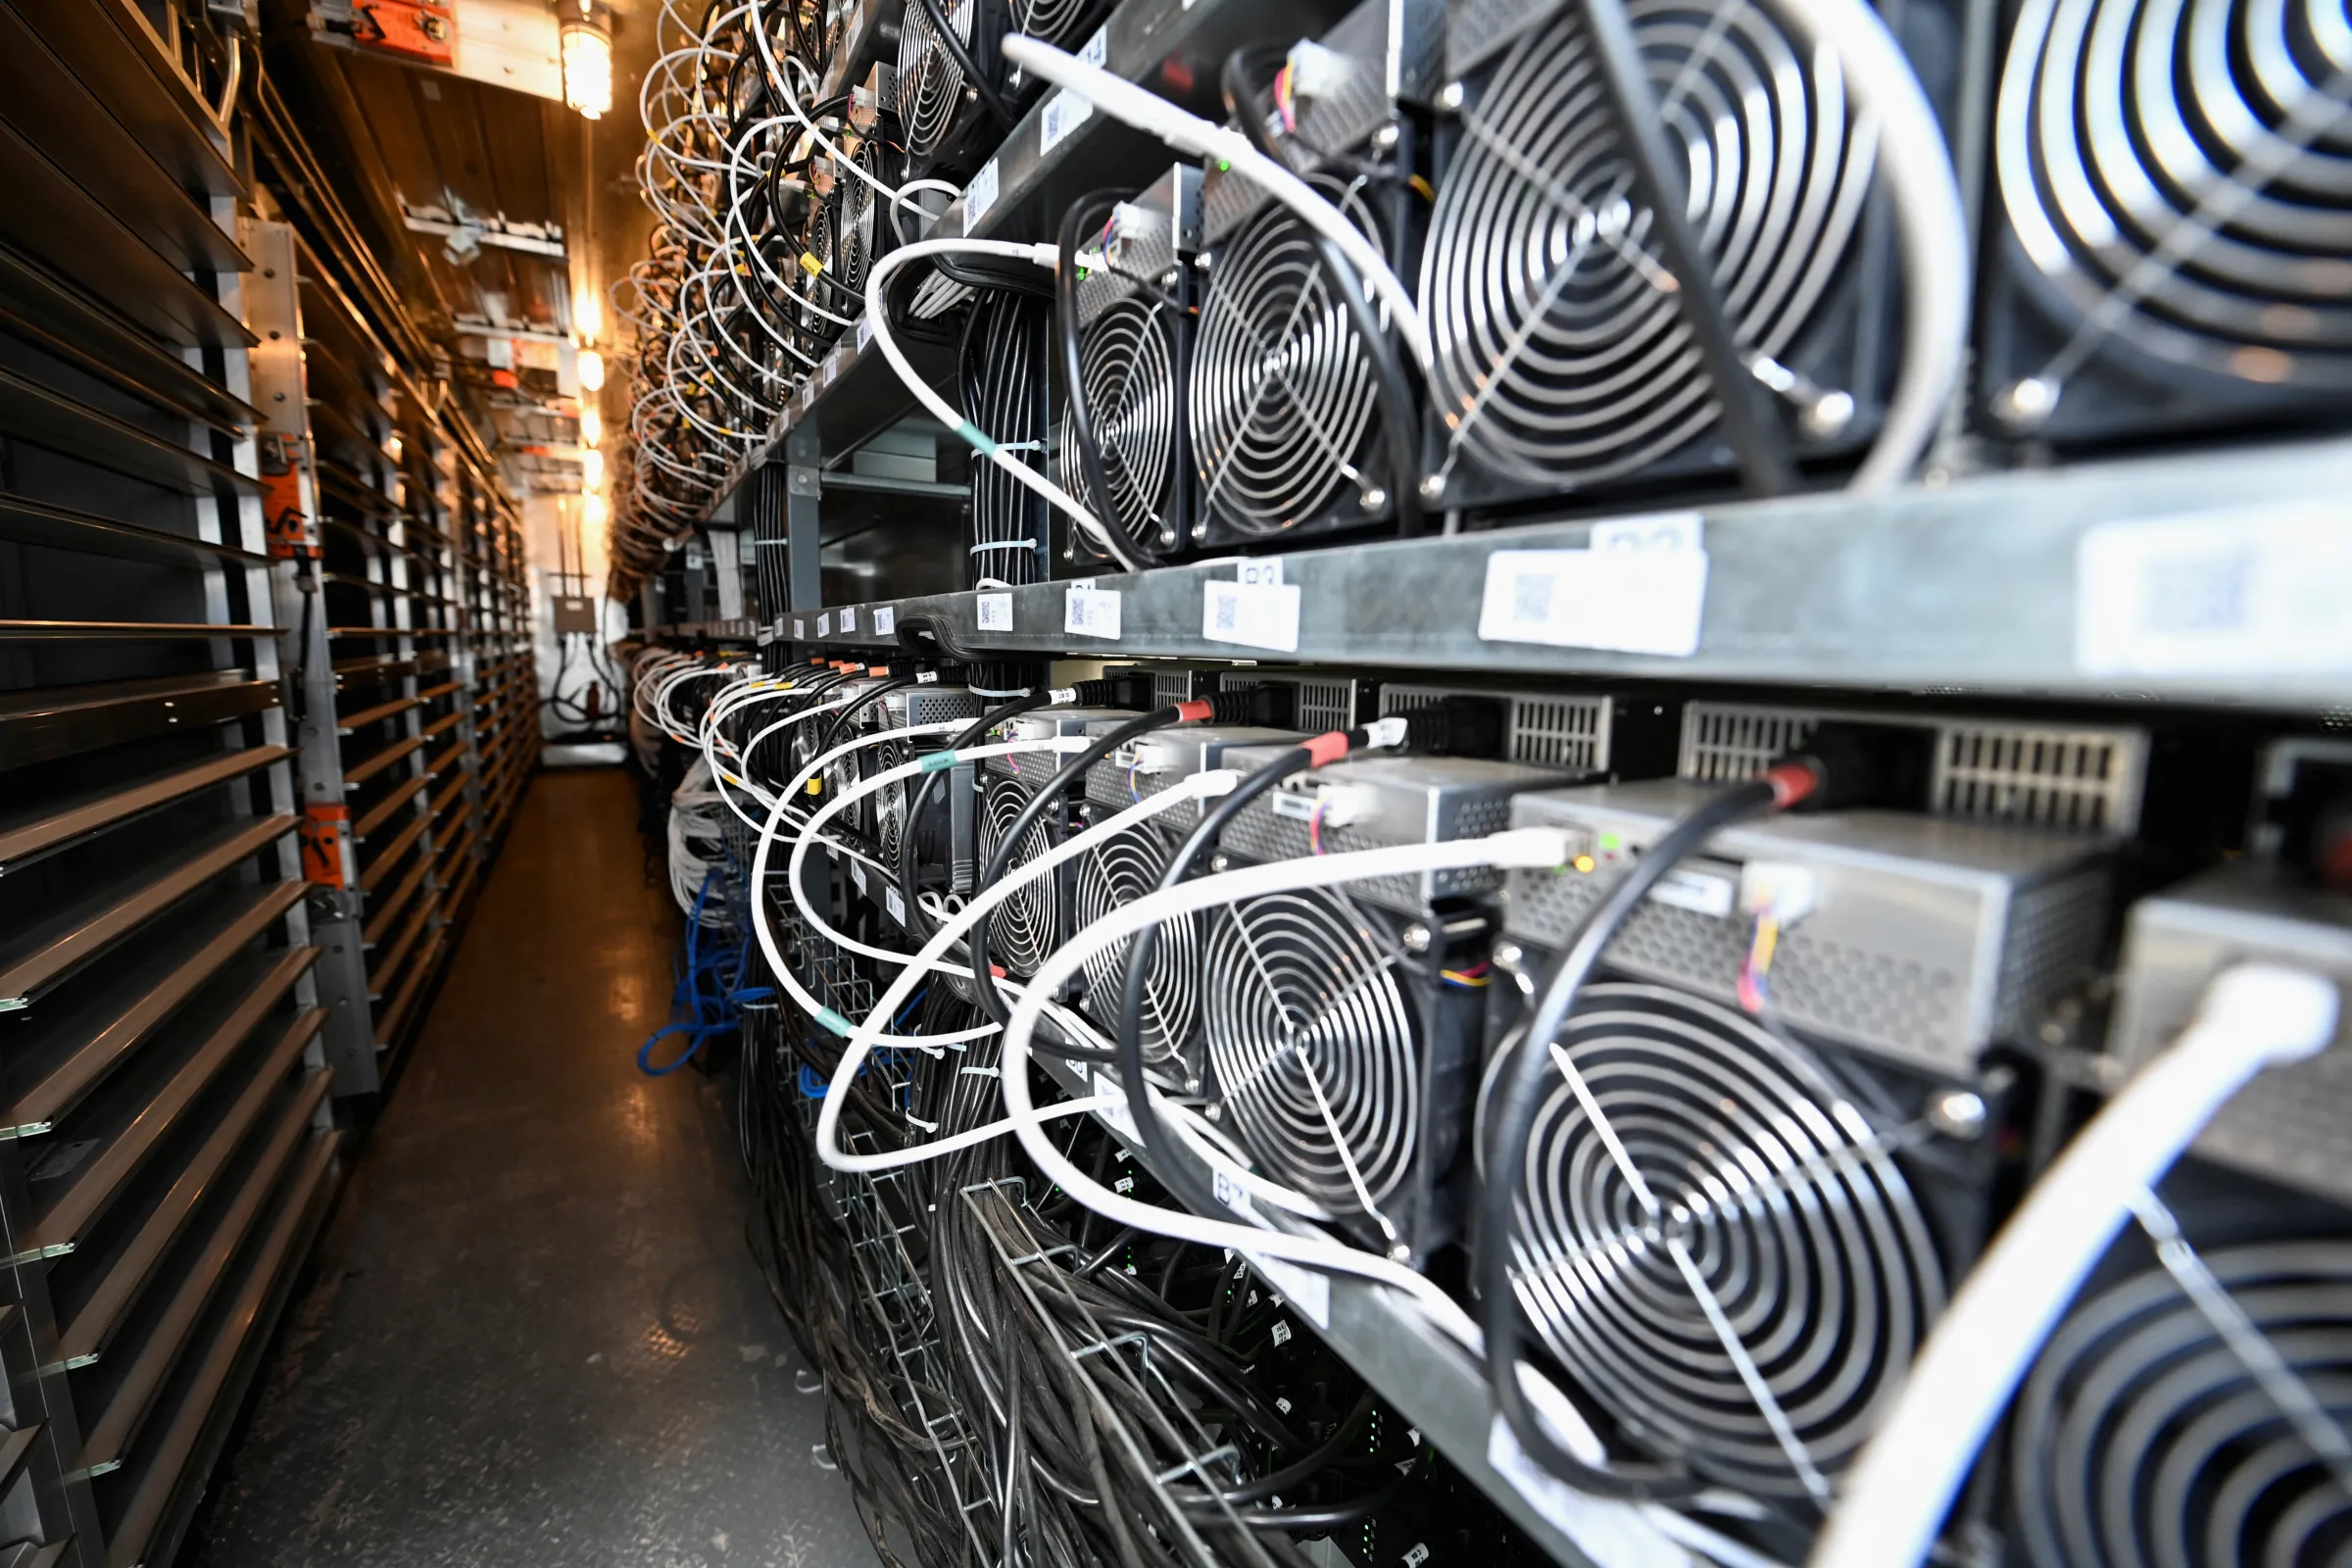 A bank of cryptocurrency miners operates at the Scrubgrass Plant in Kennerdale, Pennsylvania, U.S., March 8, 2022. Picture taken March 8, 2022. REUTERS/Alan Freed